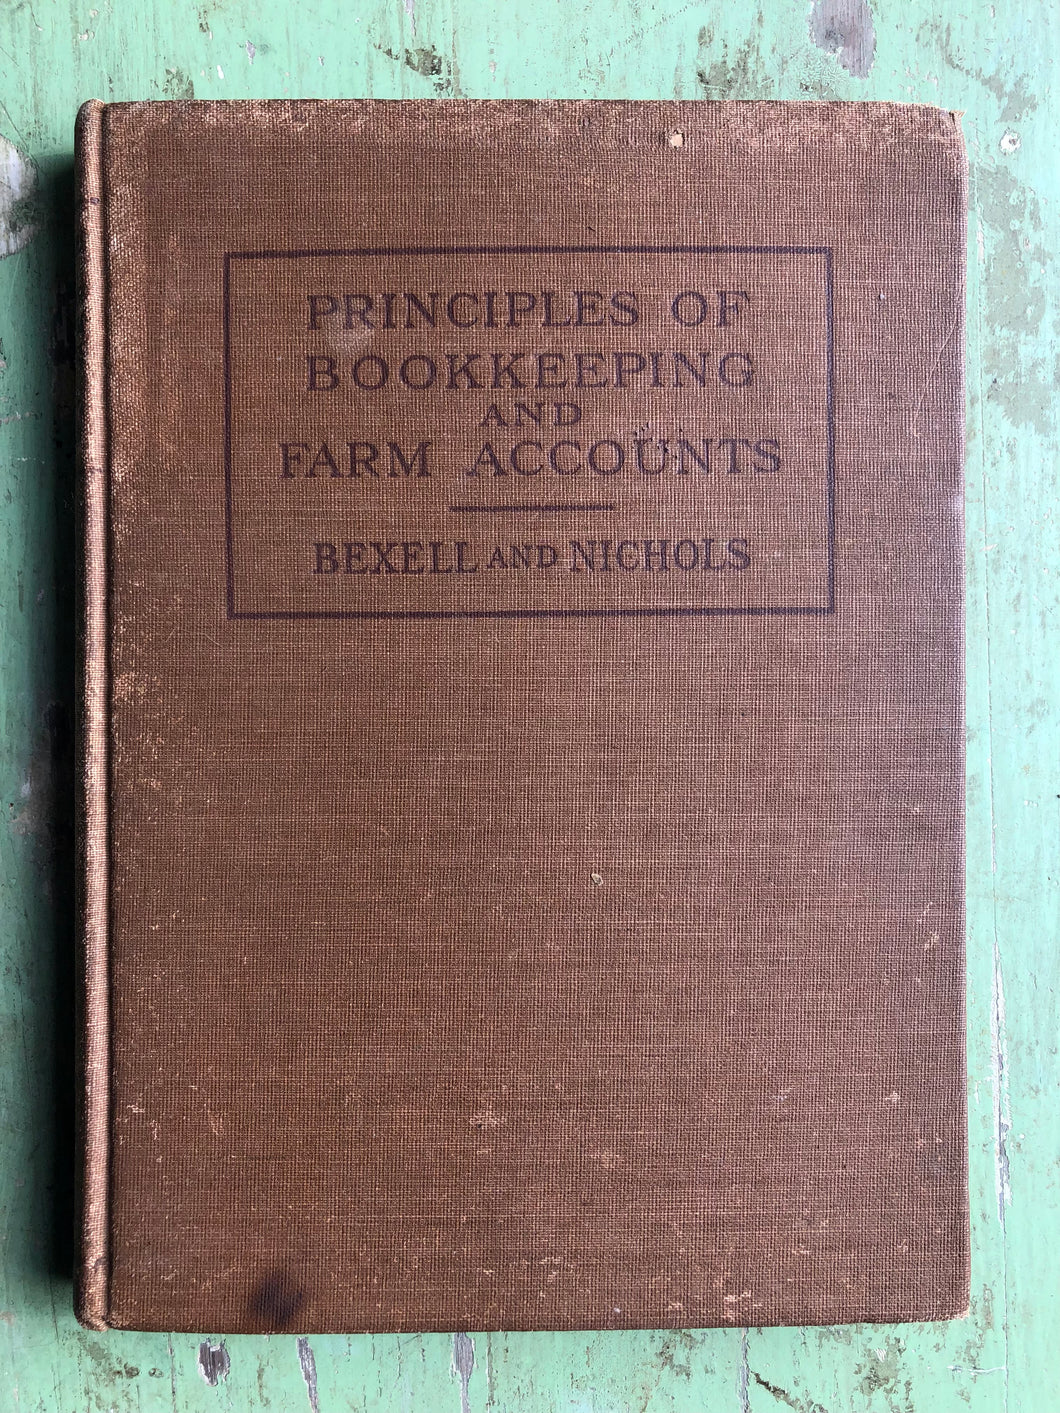 Principles of Bookkeeping and Farm Accounts by J. A. Bexell and F. G. Nichols